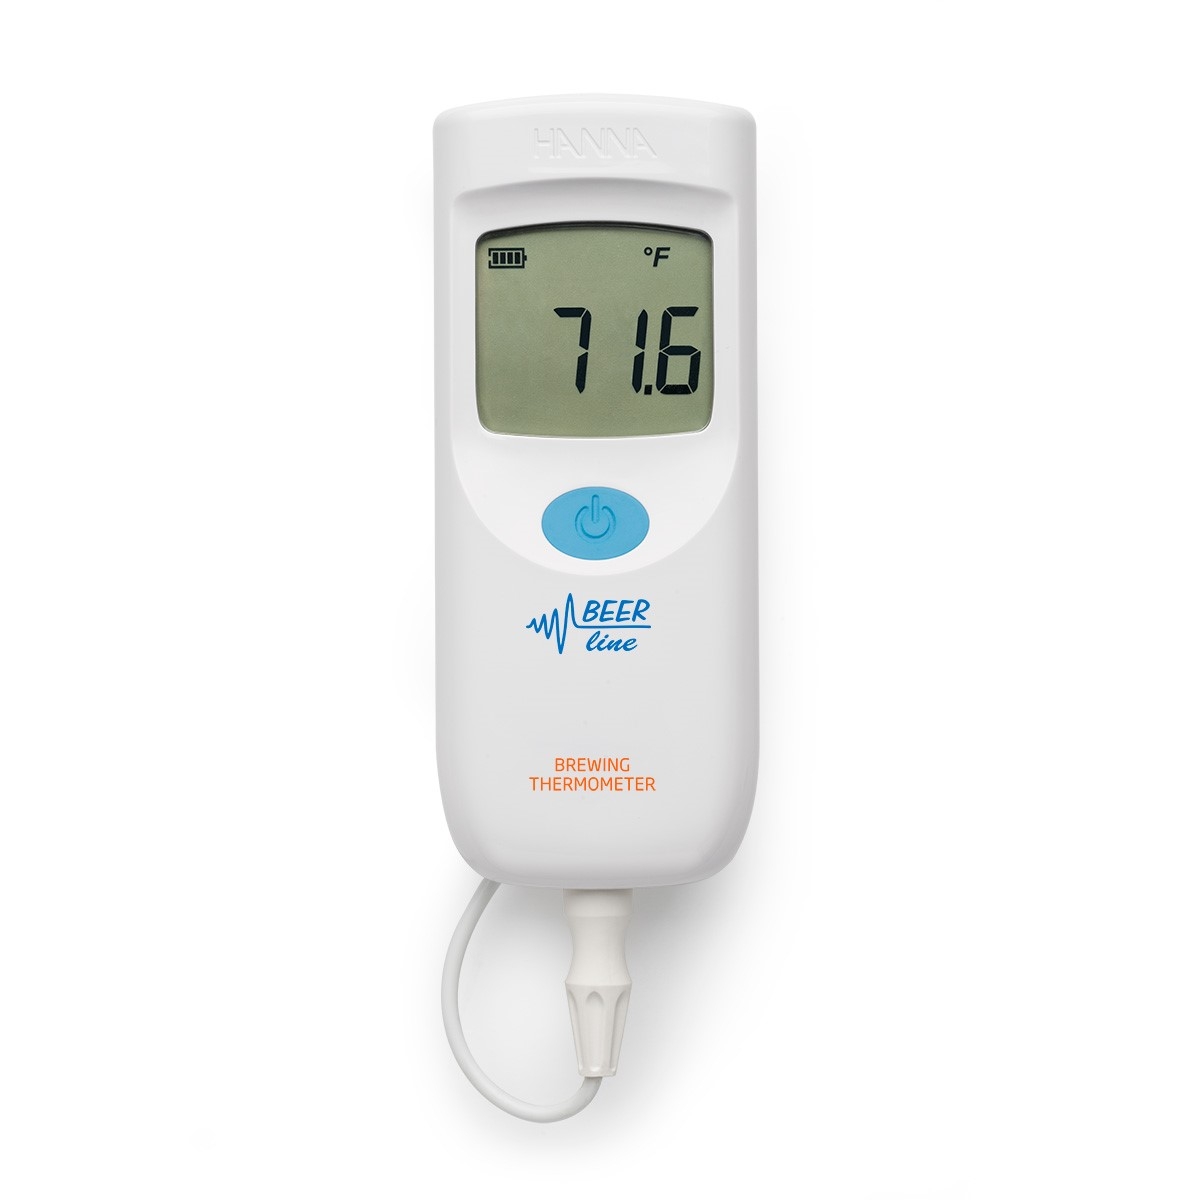 https://www.hannainst.com/hs-fs/hubfs/001-website/images/brewing-thermometer-hi935012.jpg?width=1200&name=brewing-thermometer-hi935012.jpg